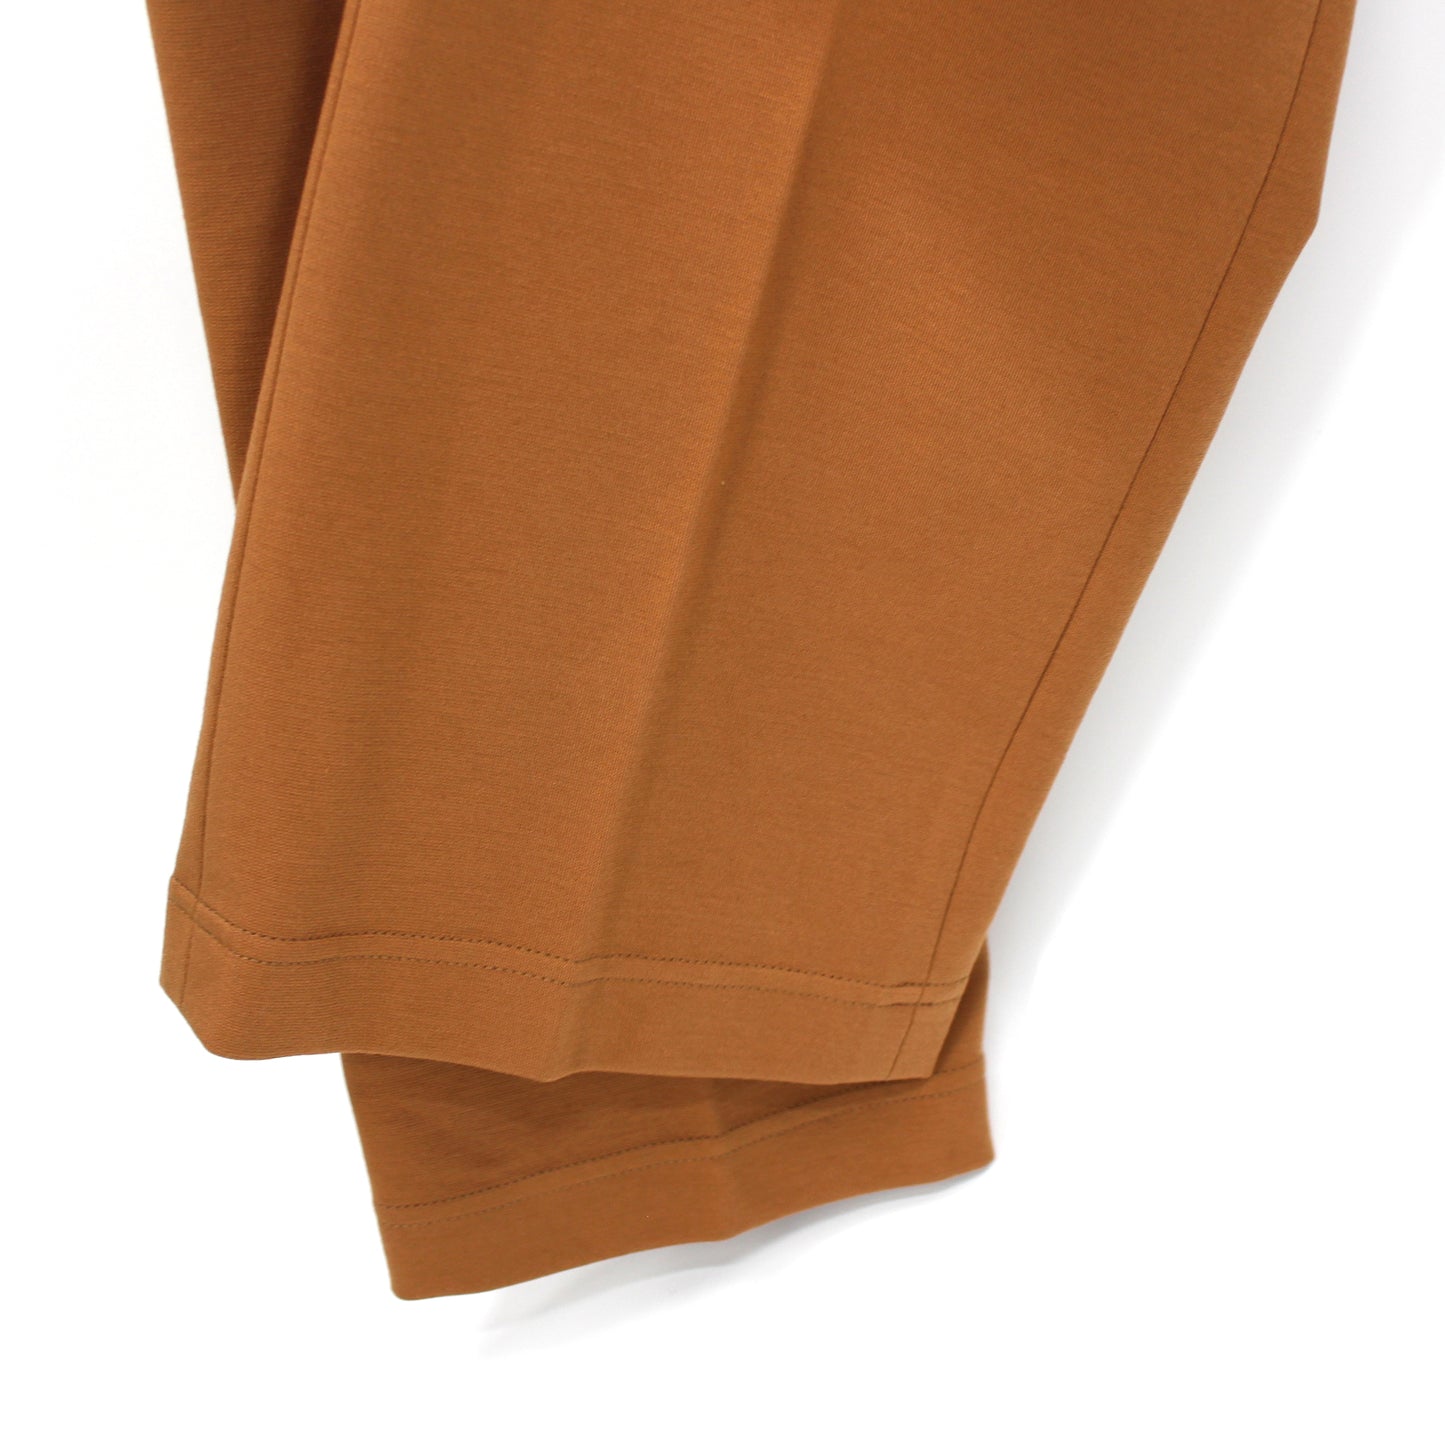 Burberry Tailored Jersey Trousers